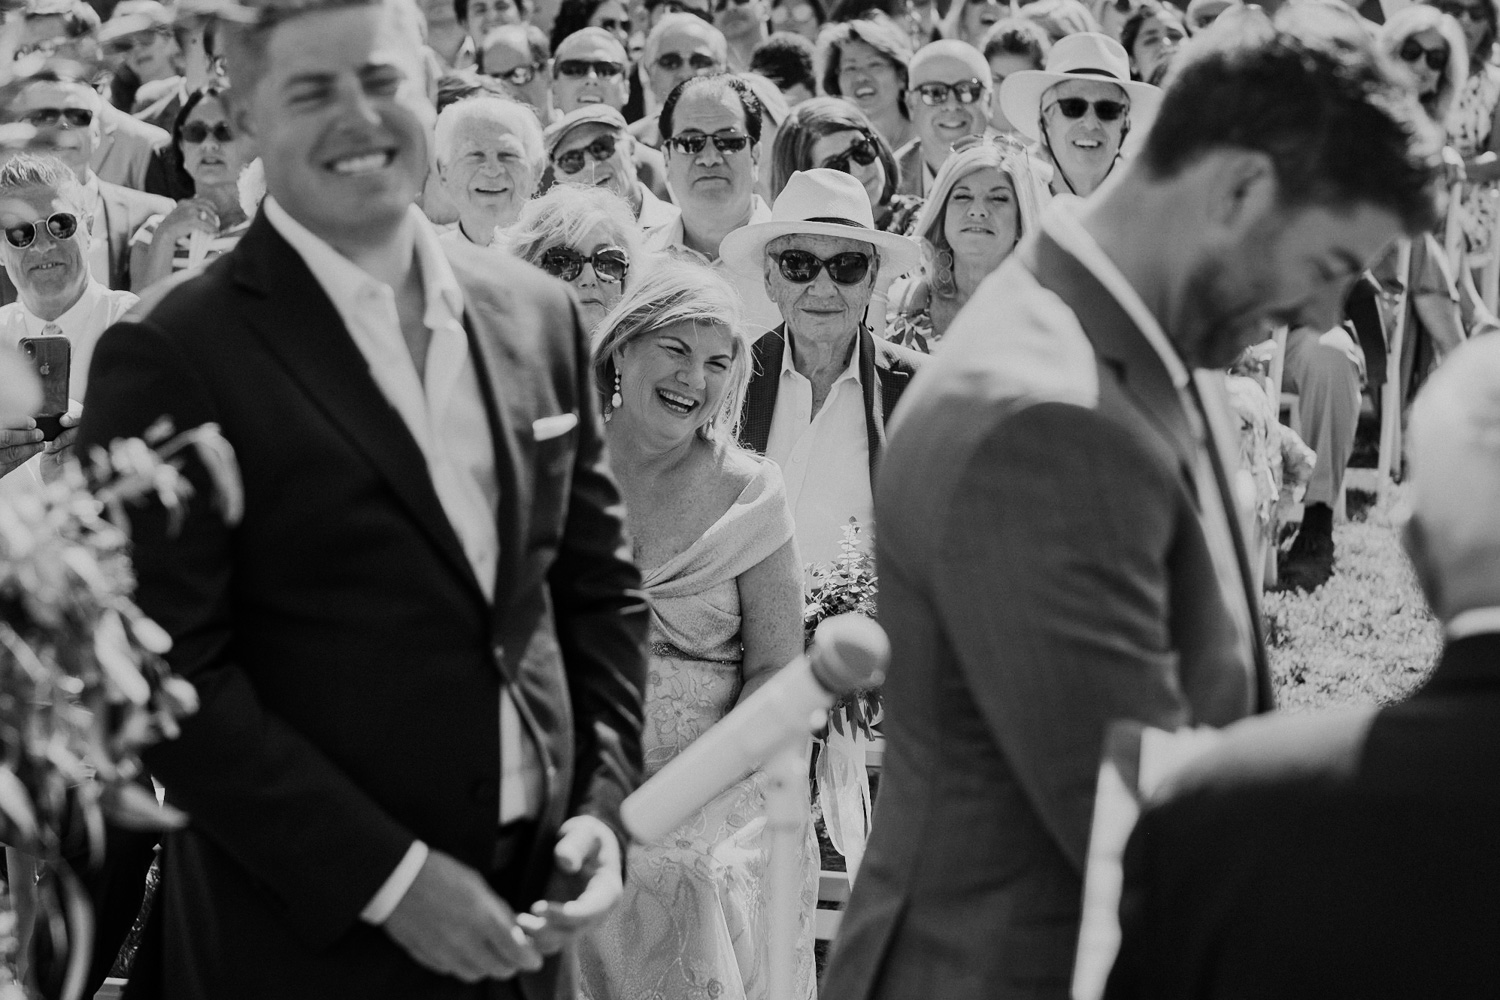 Groom's mother smiles as she watches her son get married during the vows